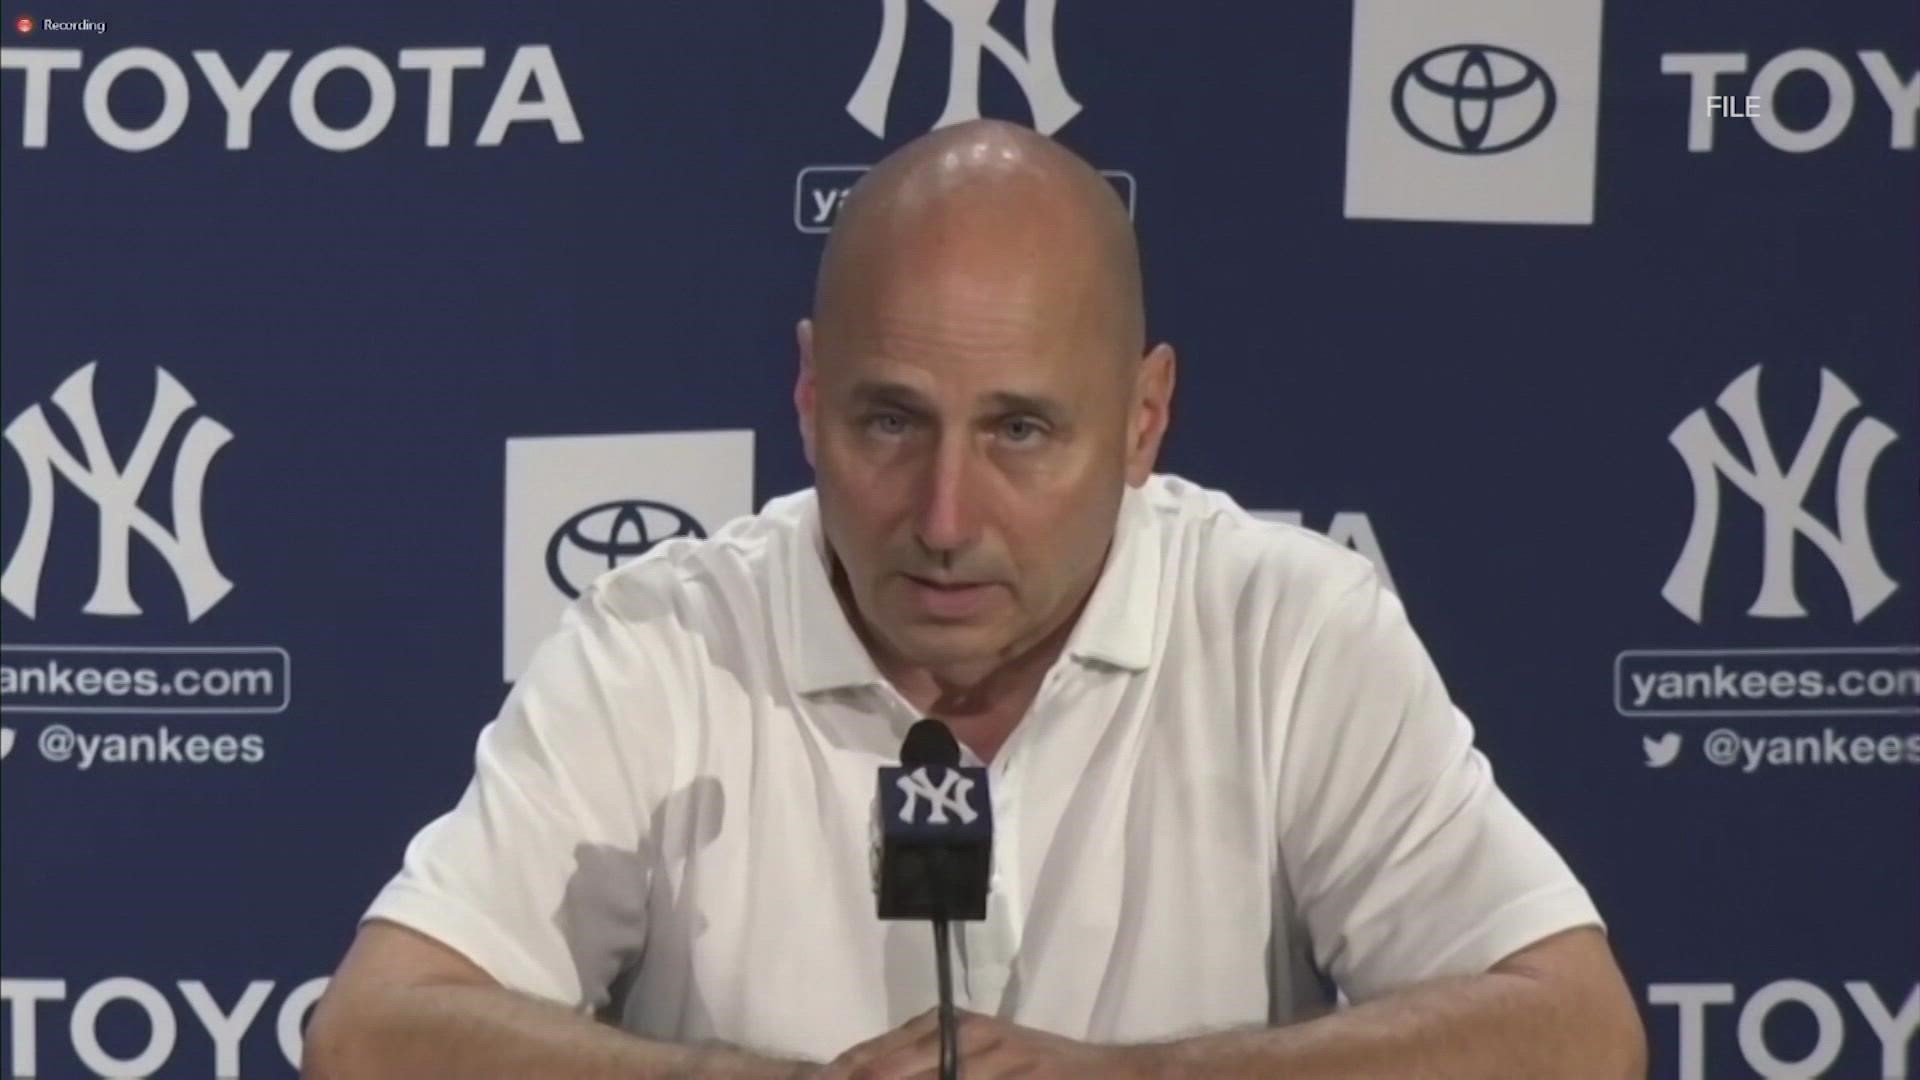 Cashman said the only thing that kept the New York Yankees from winning a World Series was the Astros' cheating scandal.